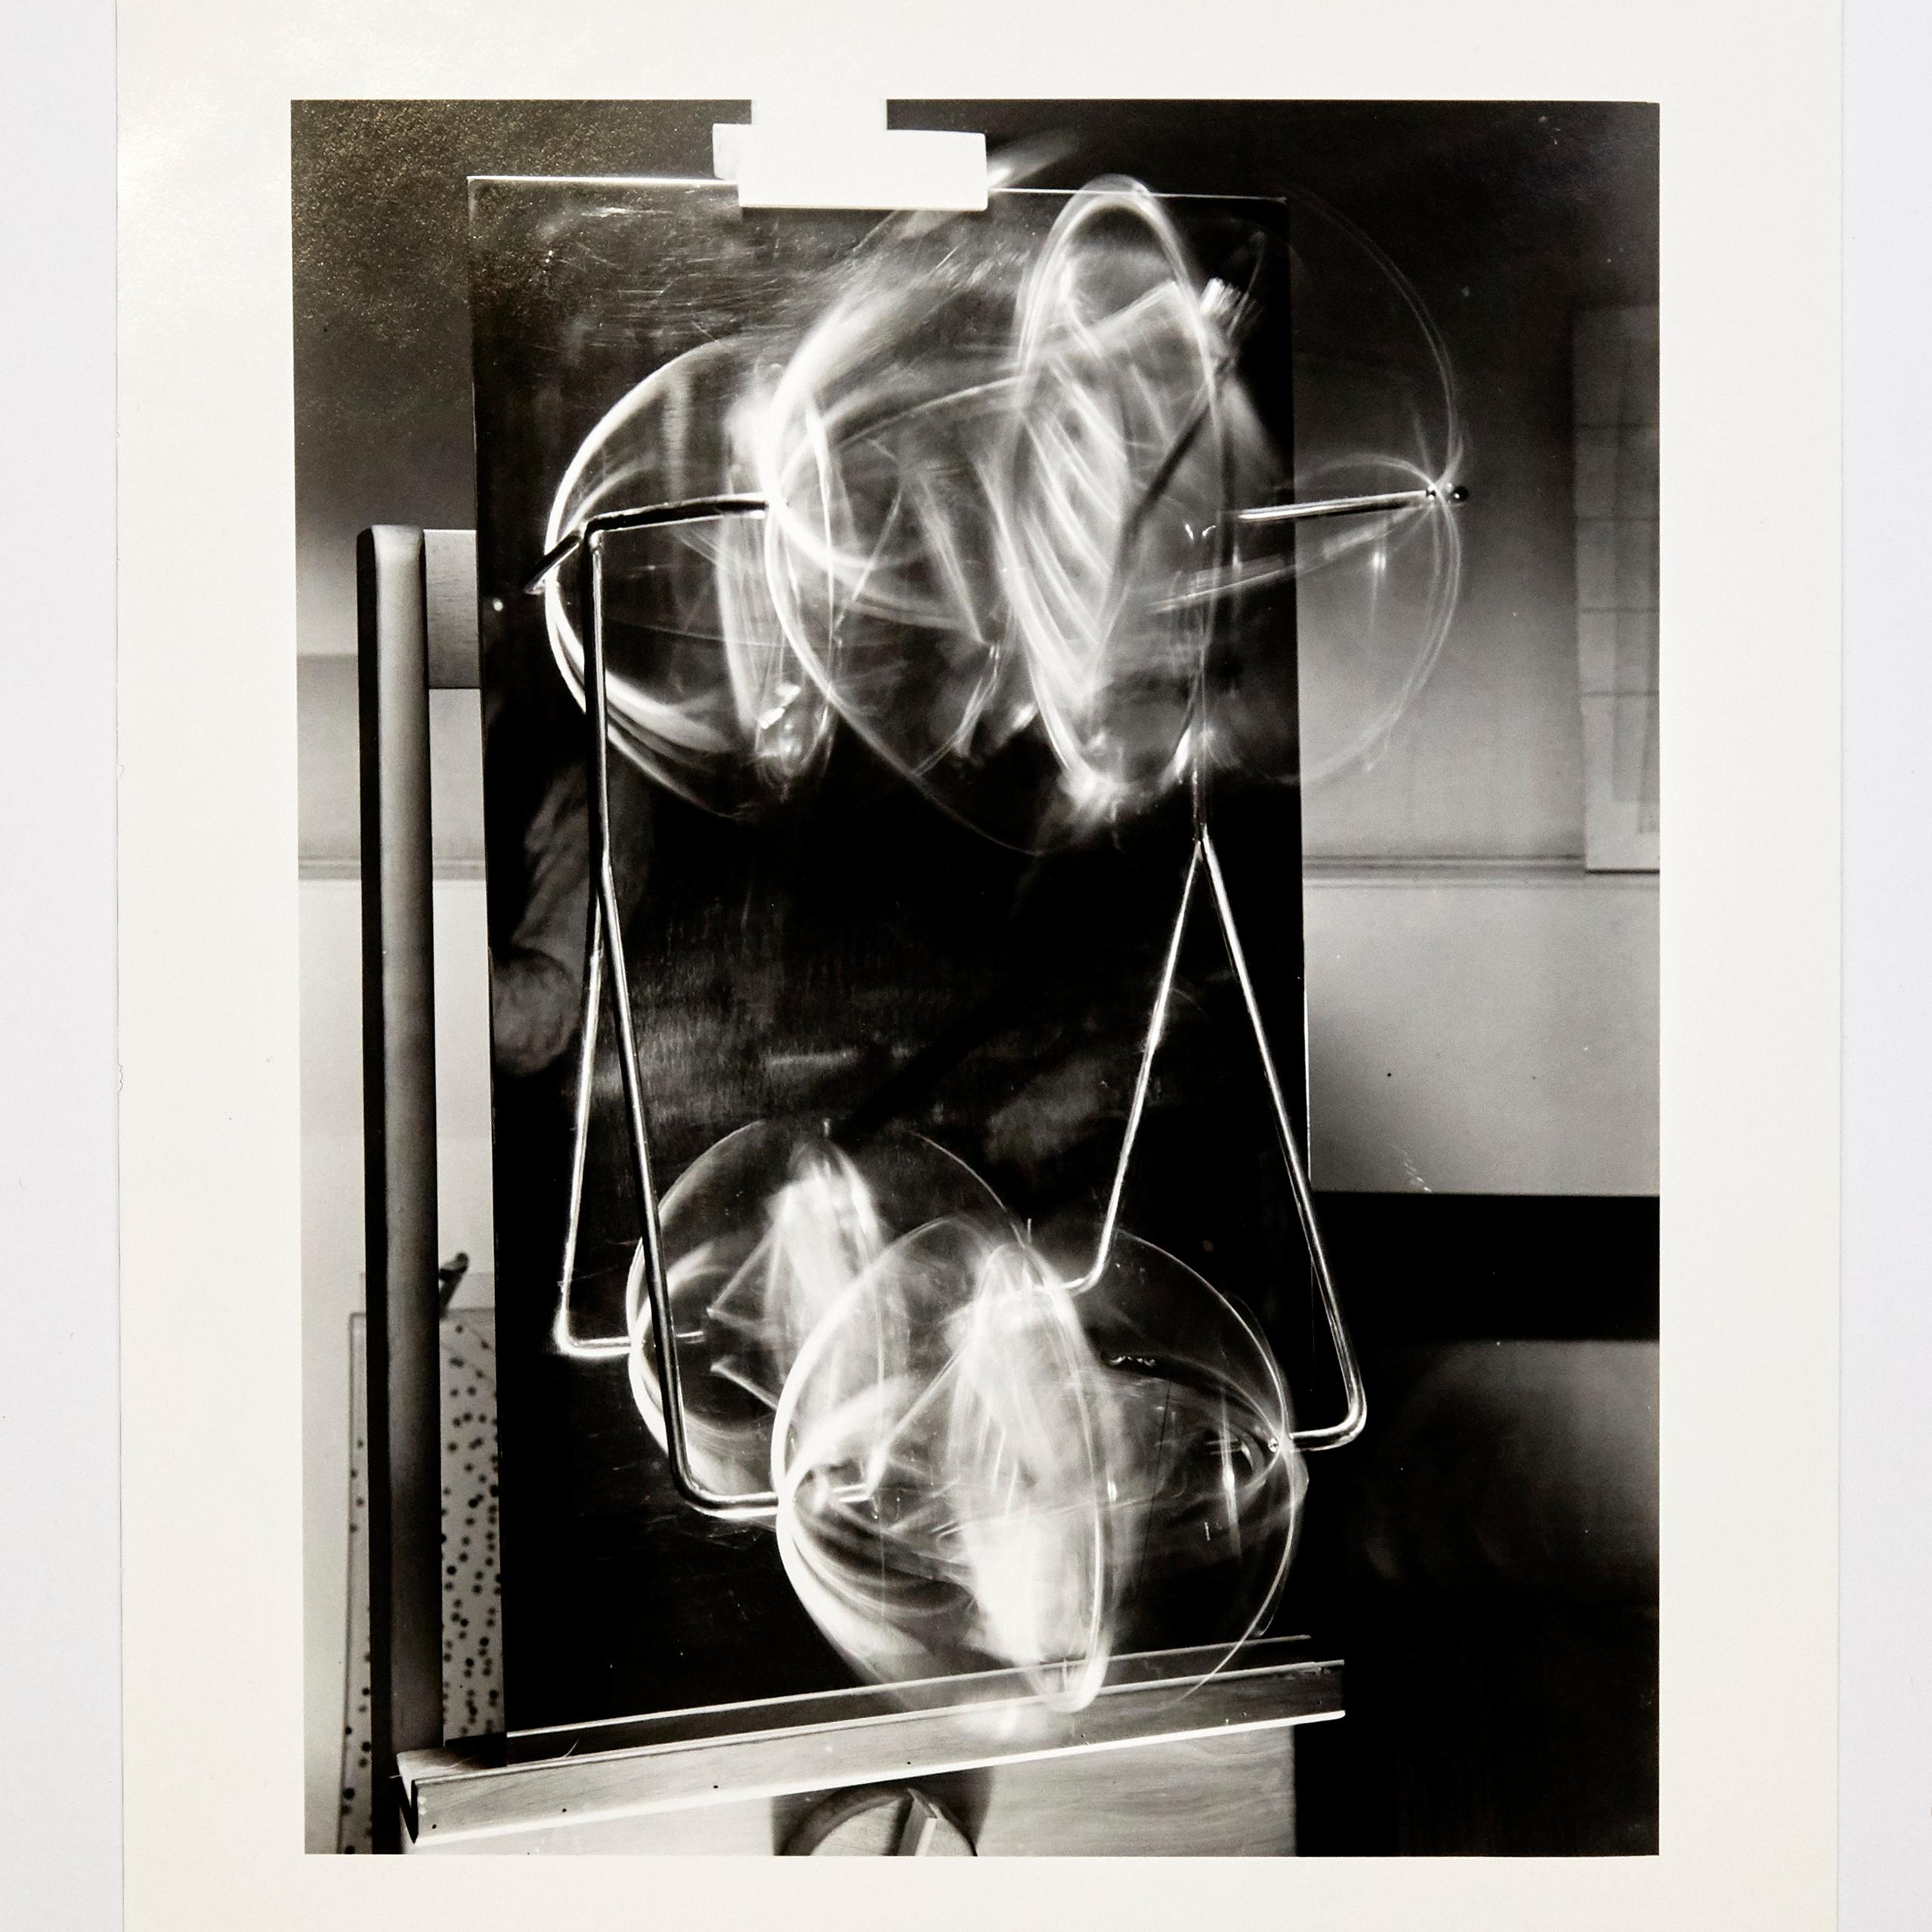 László Moholy-Nagy photography 2/6 from a set of 6 photographies.
Single edition of 'Light-Room Modulations' folder, original title 'Licht-Raum Modulationen.'
Published by Edition Griffelkunst in Hamburg, 2005.

On verso monogrammed and